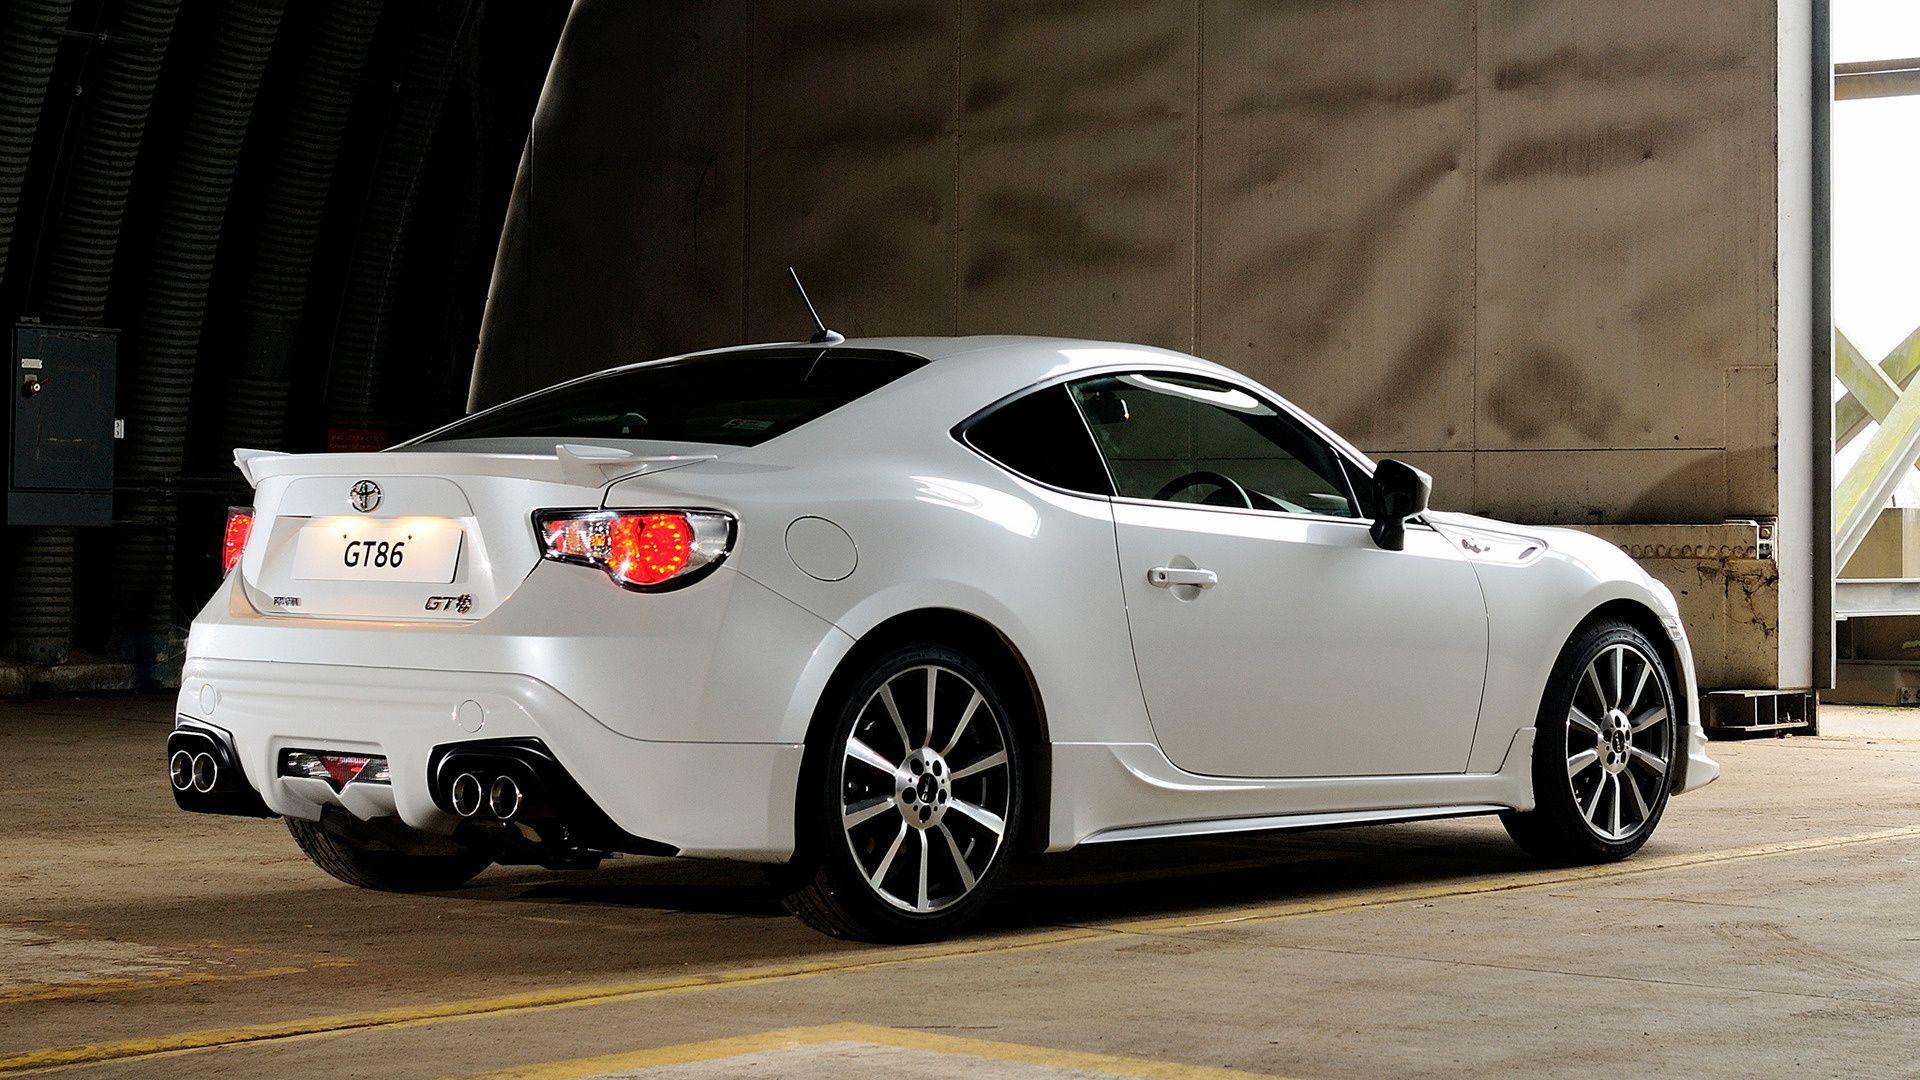 TRD Toyota GT 86 (2013) UK Wallpaper and HD Image